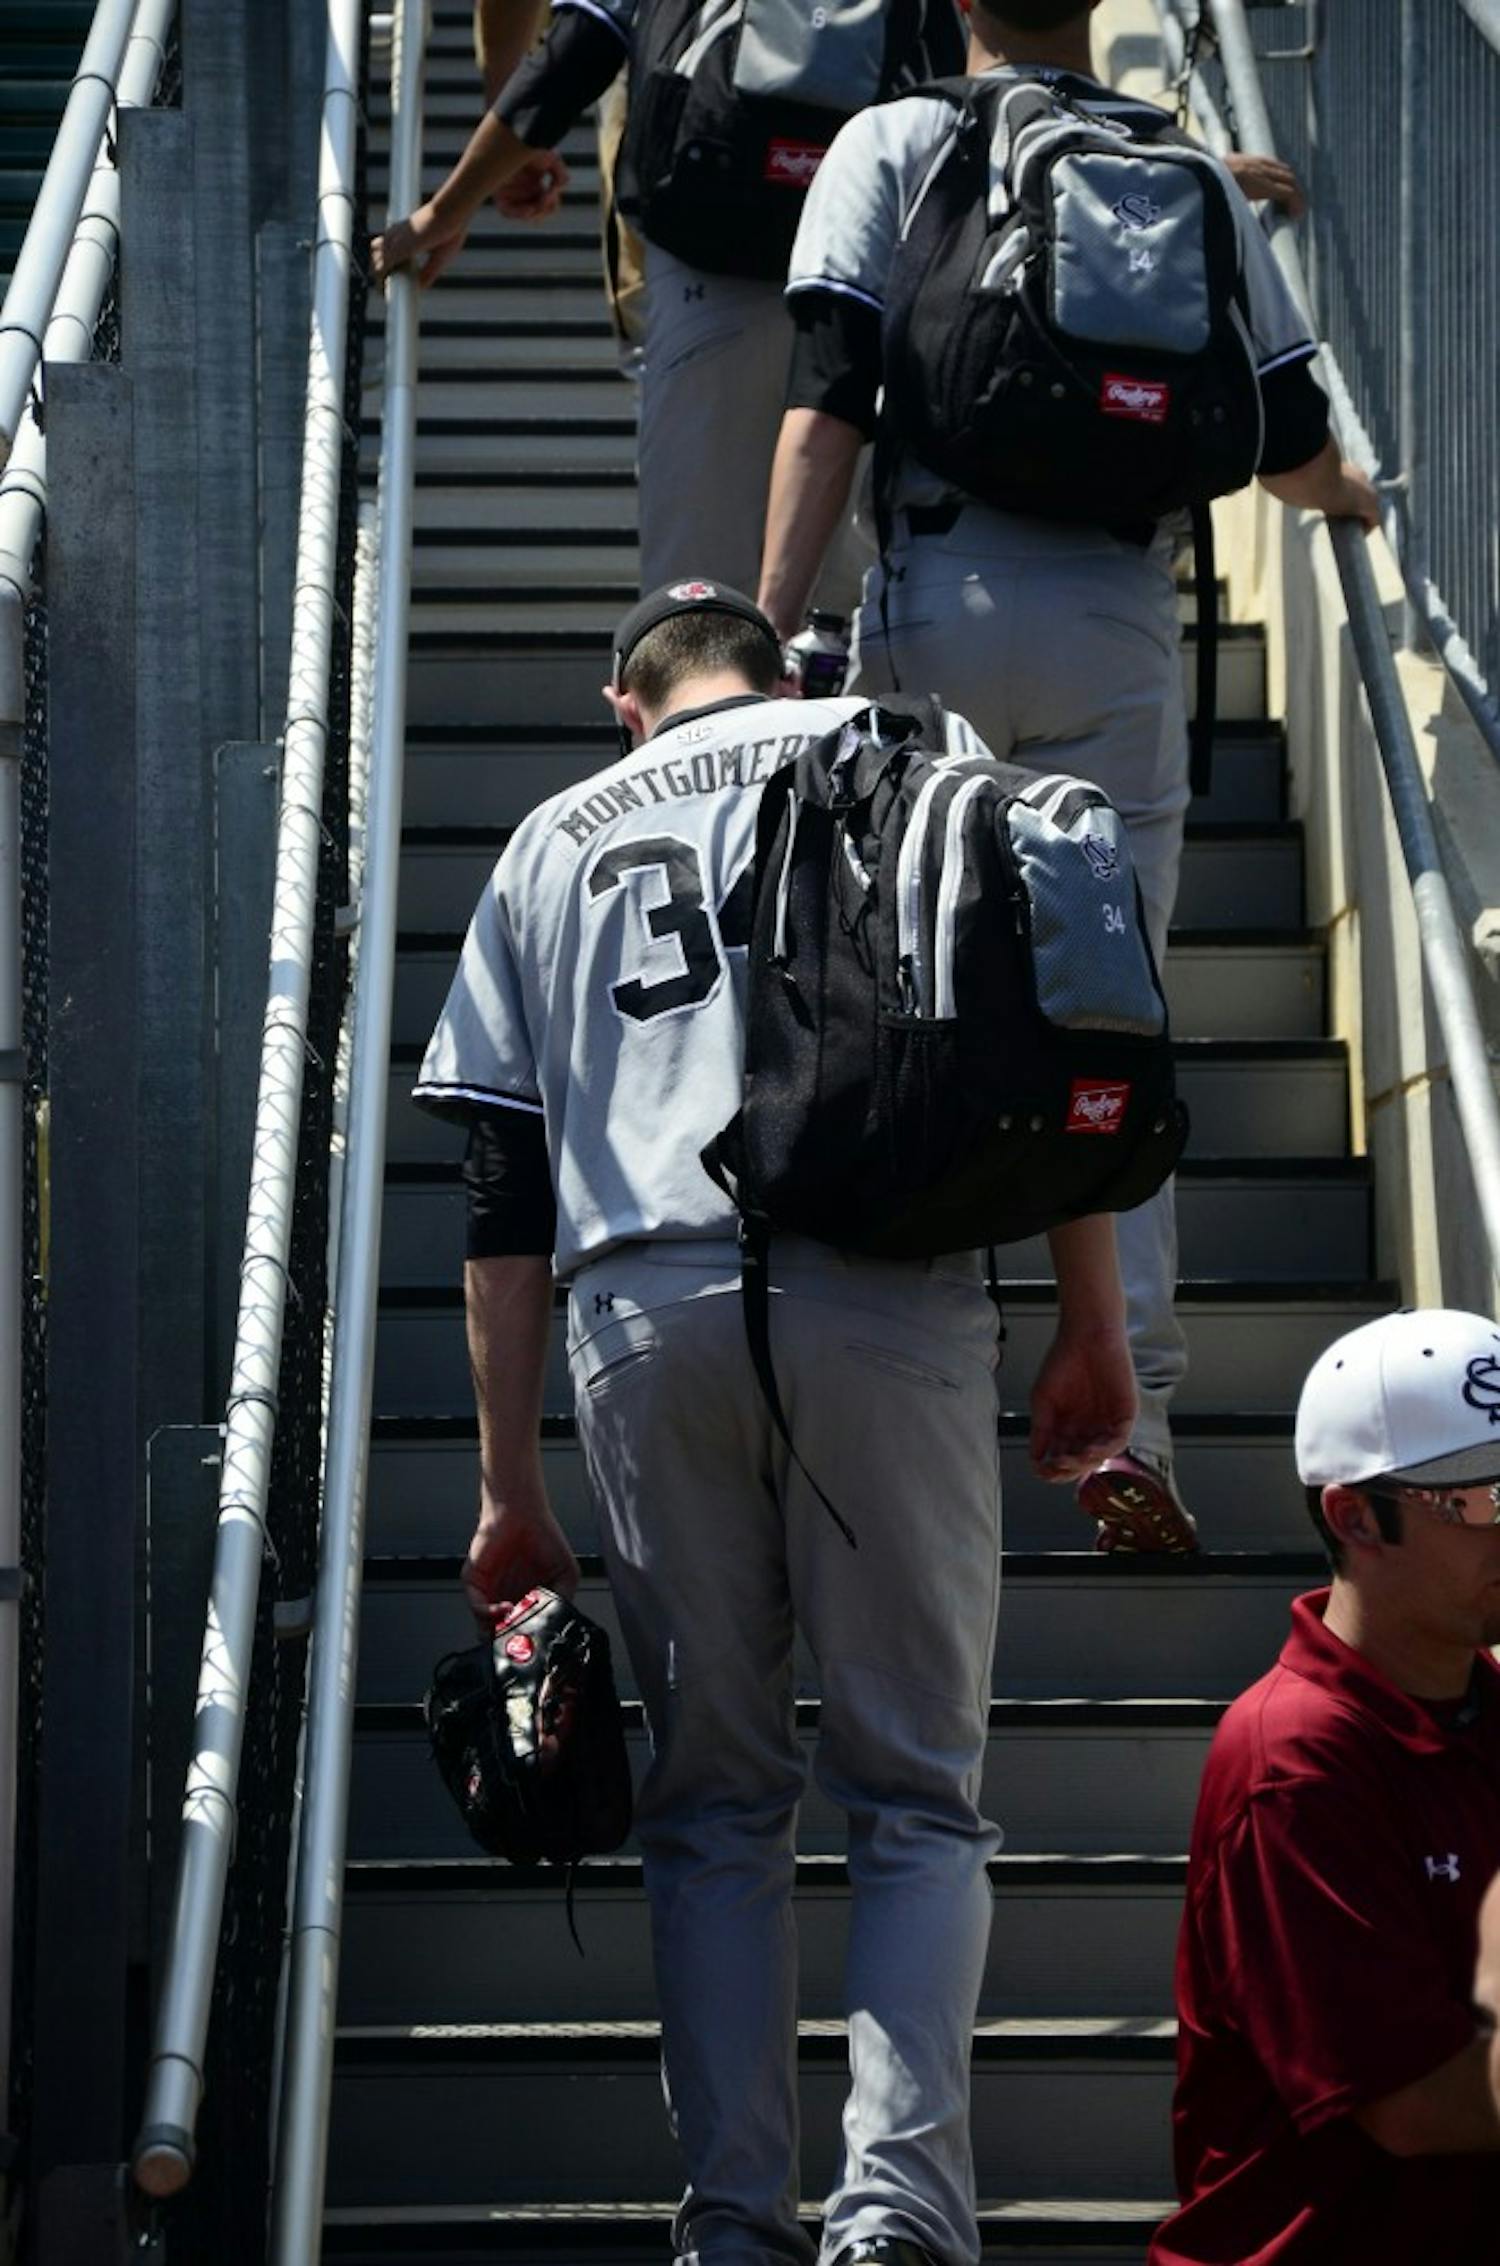 Jordan Montgomery, who led the Gamecocks to a victory in their second game, exits the stadium with his teammates.